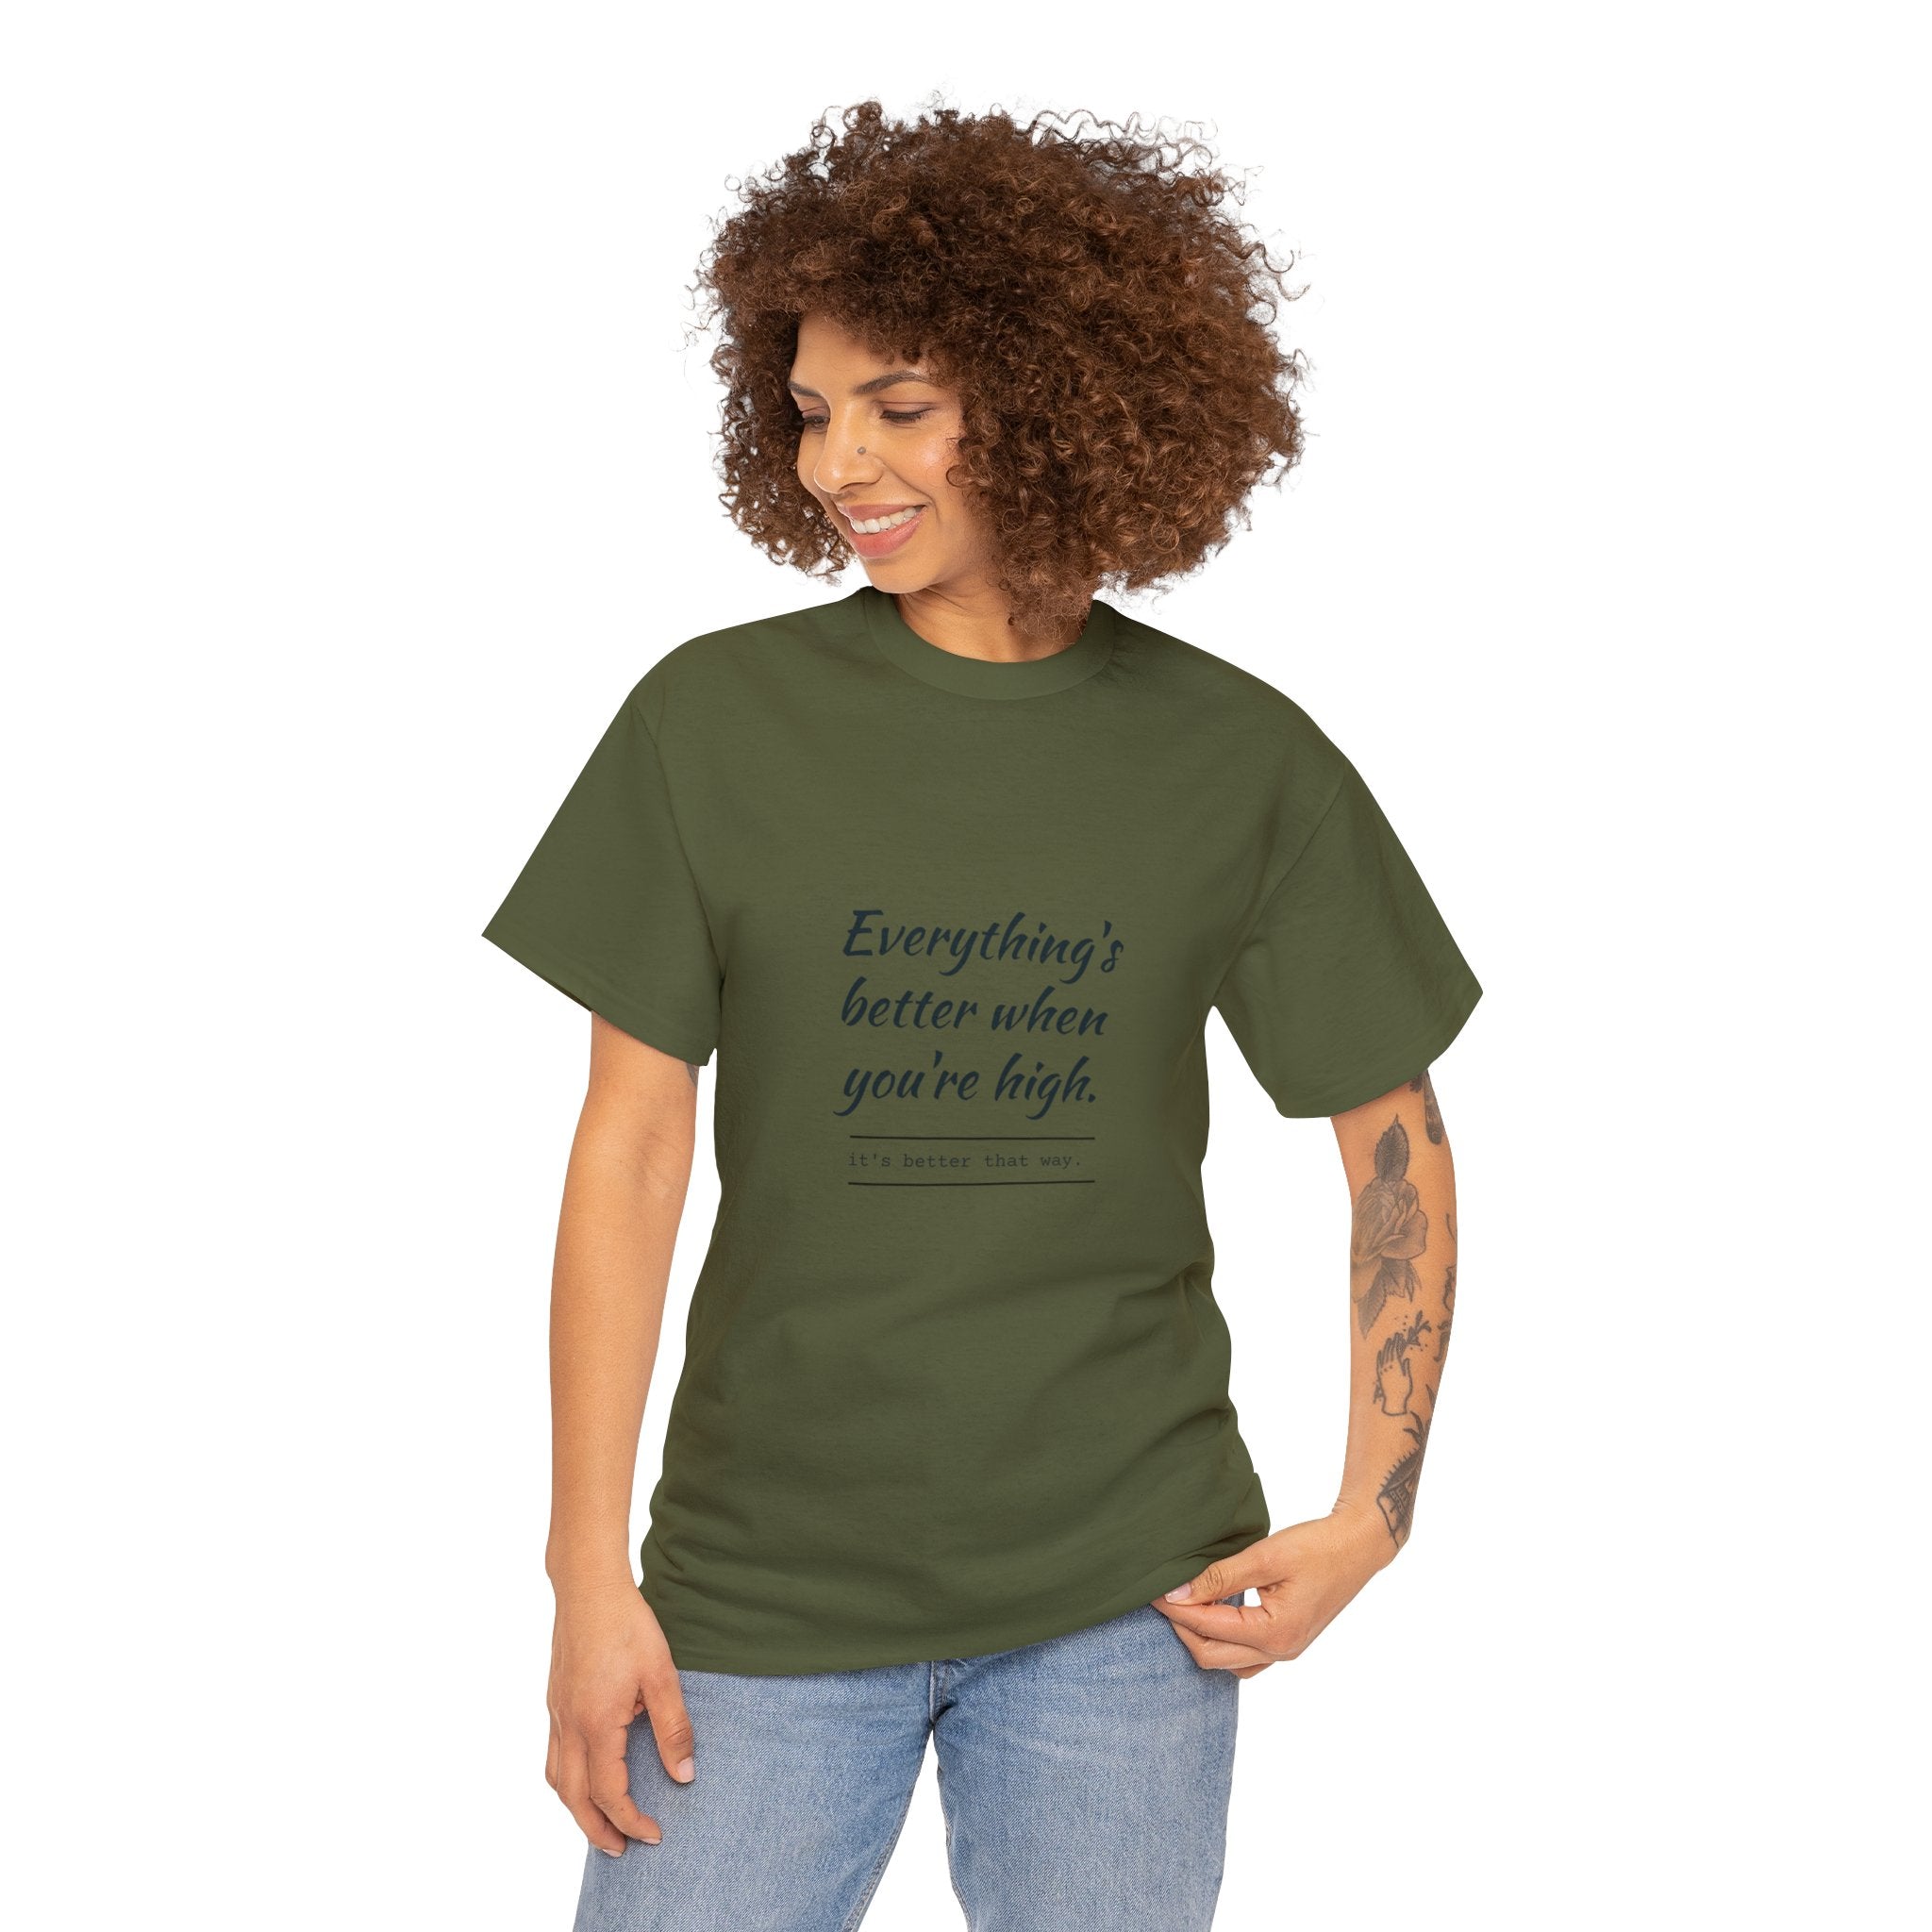 Everything is better when you're high tee - TRU2 Clothing